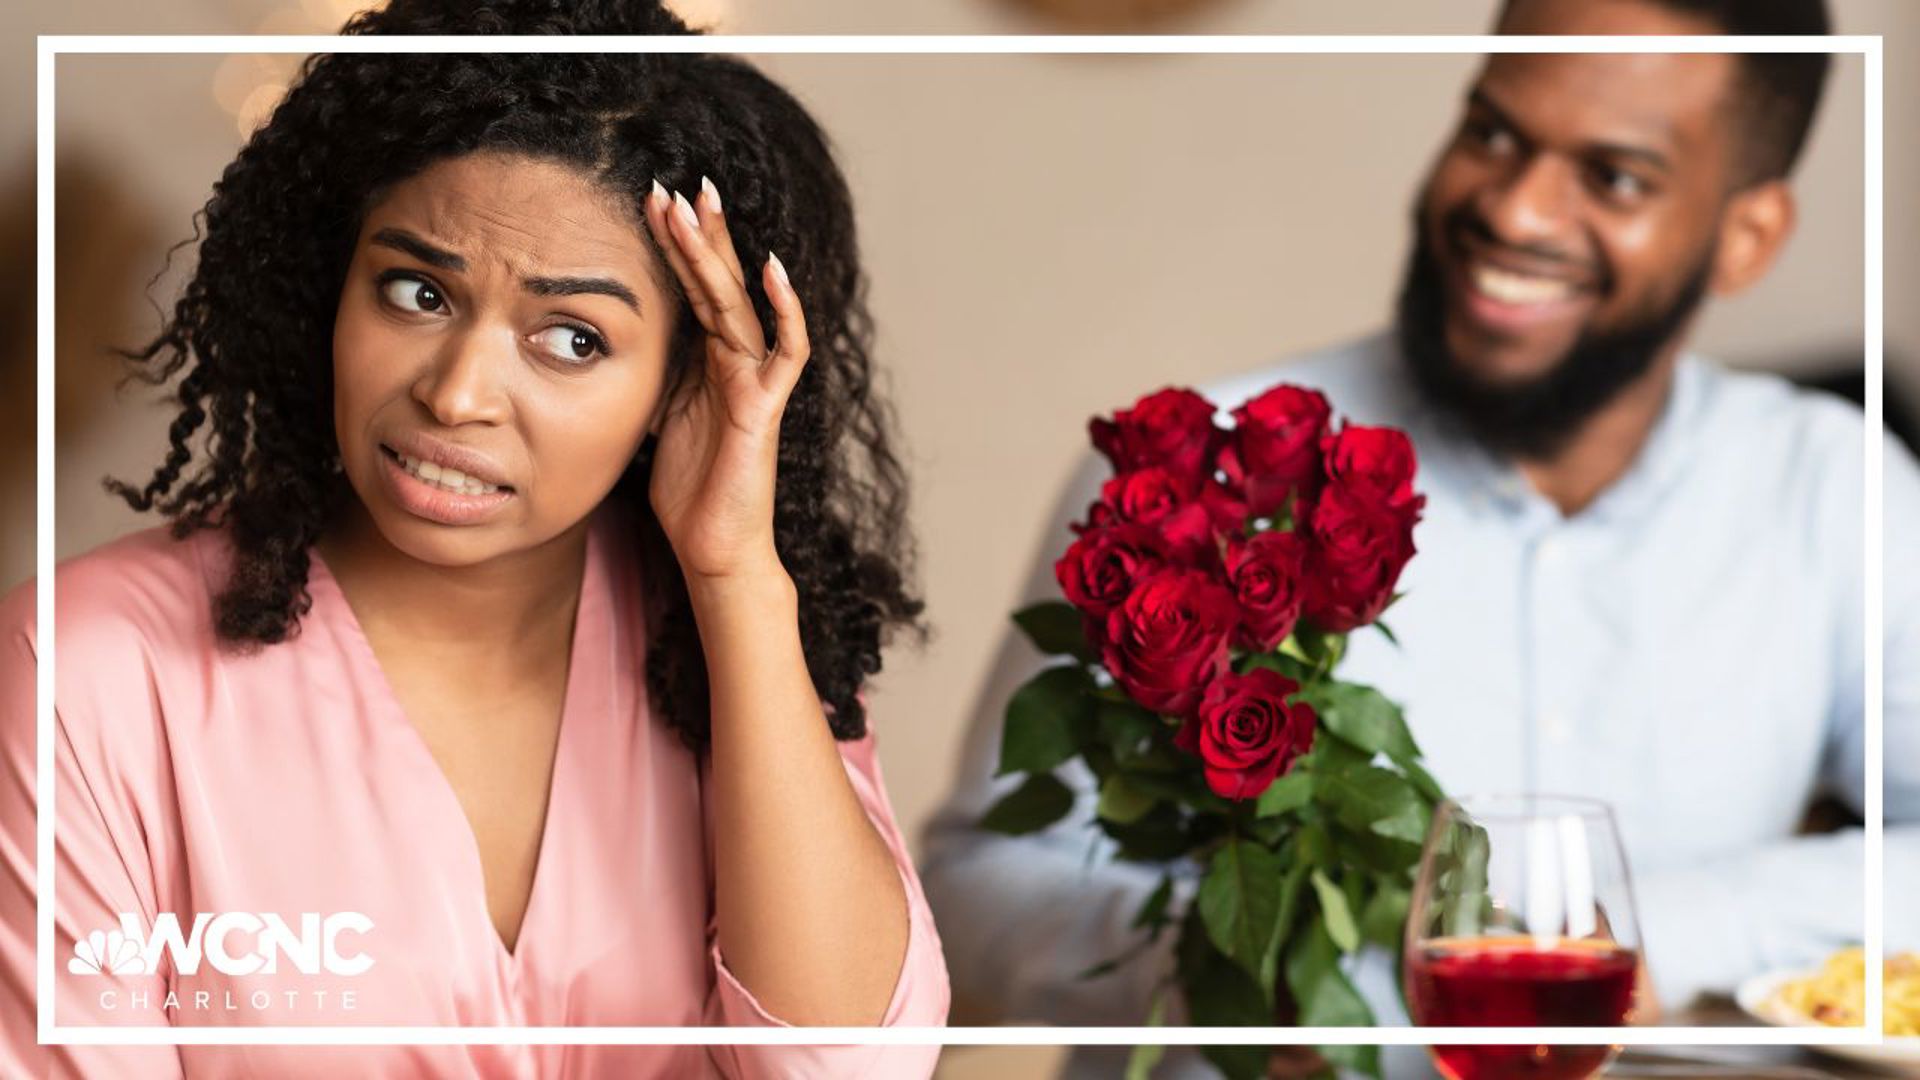 We all know dating can be stressful, but it's particularly tough on women, who say the stress of finding a partner can make them physically sick.